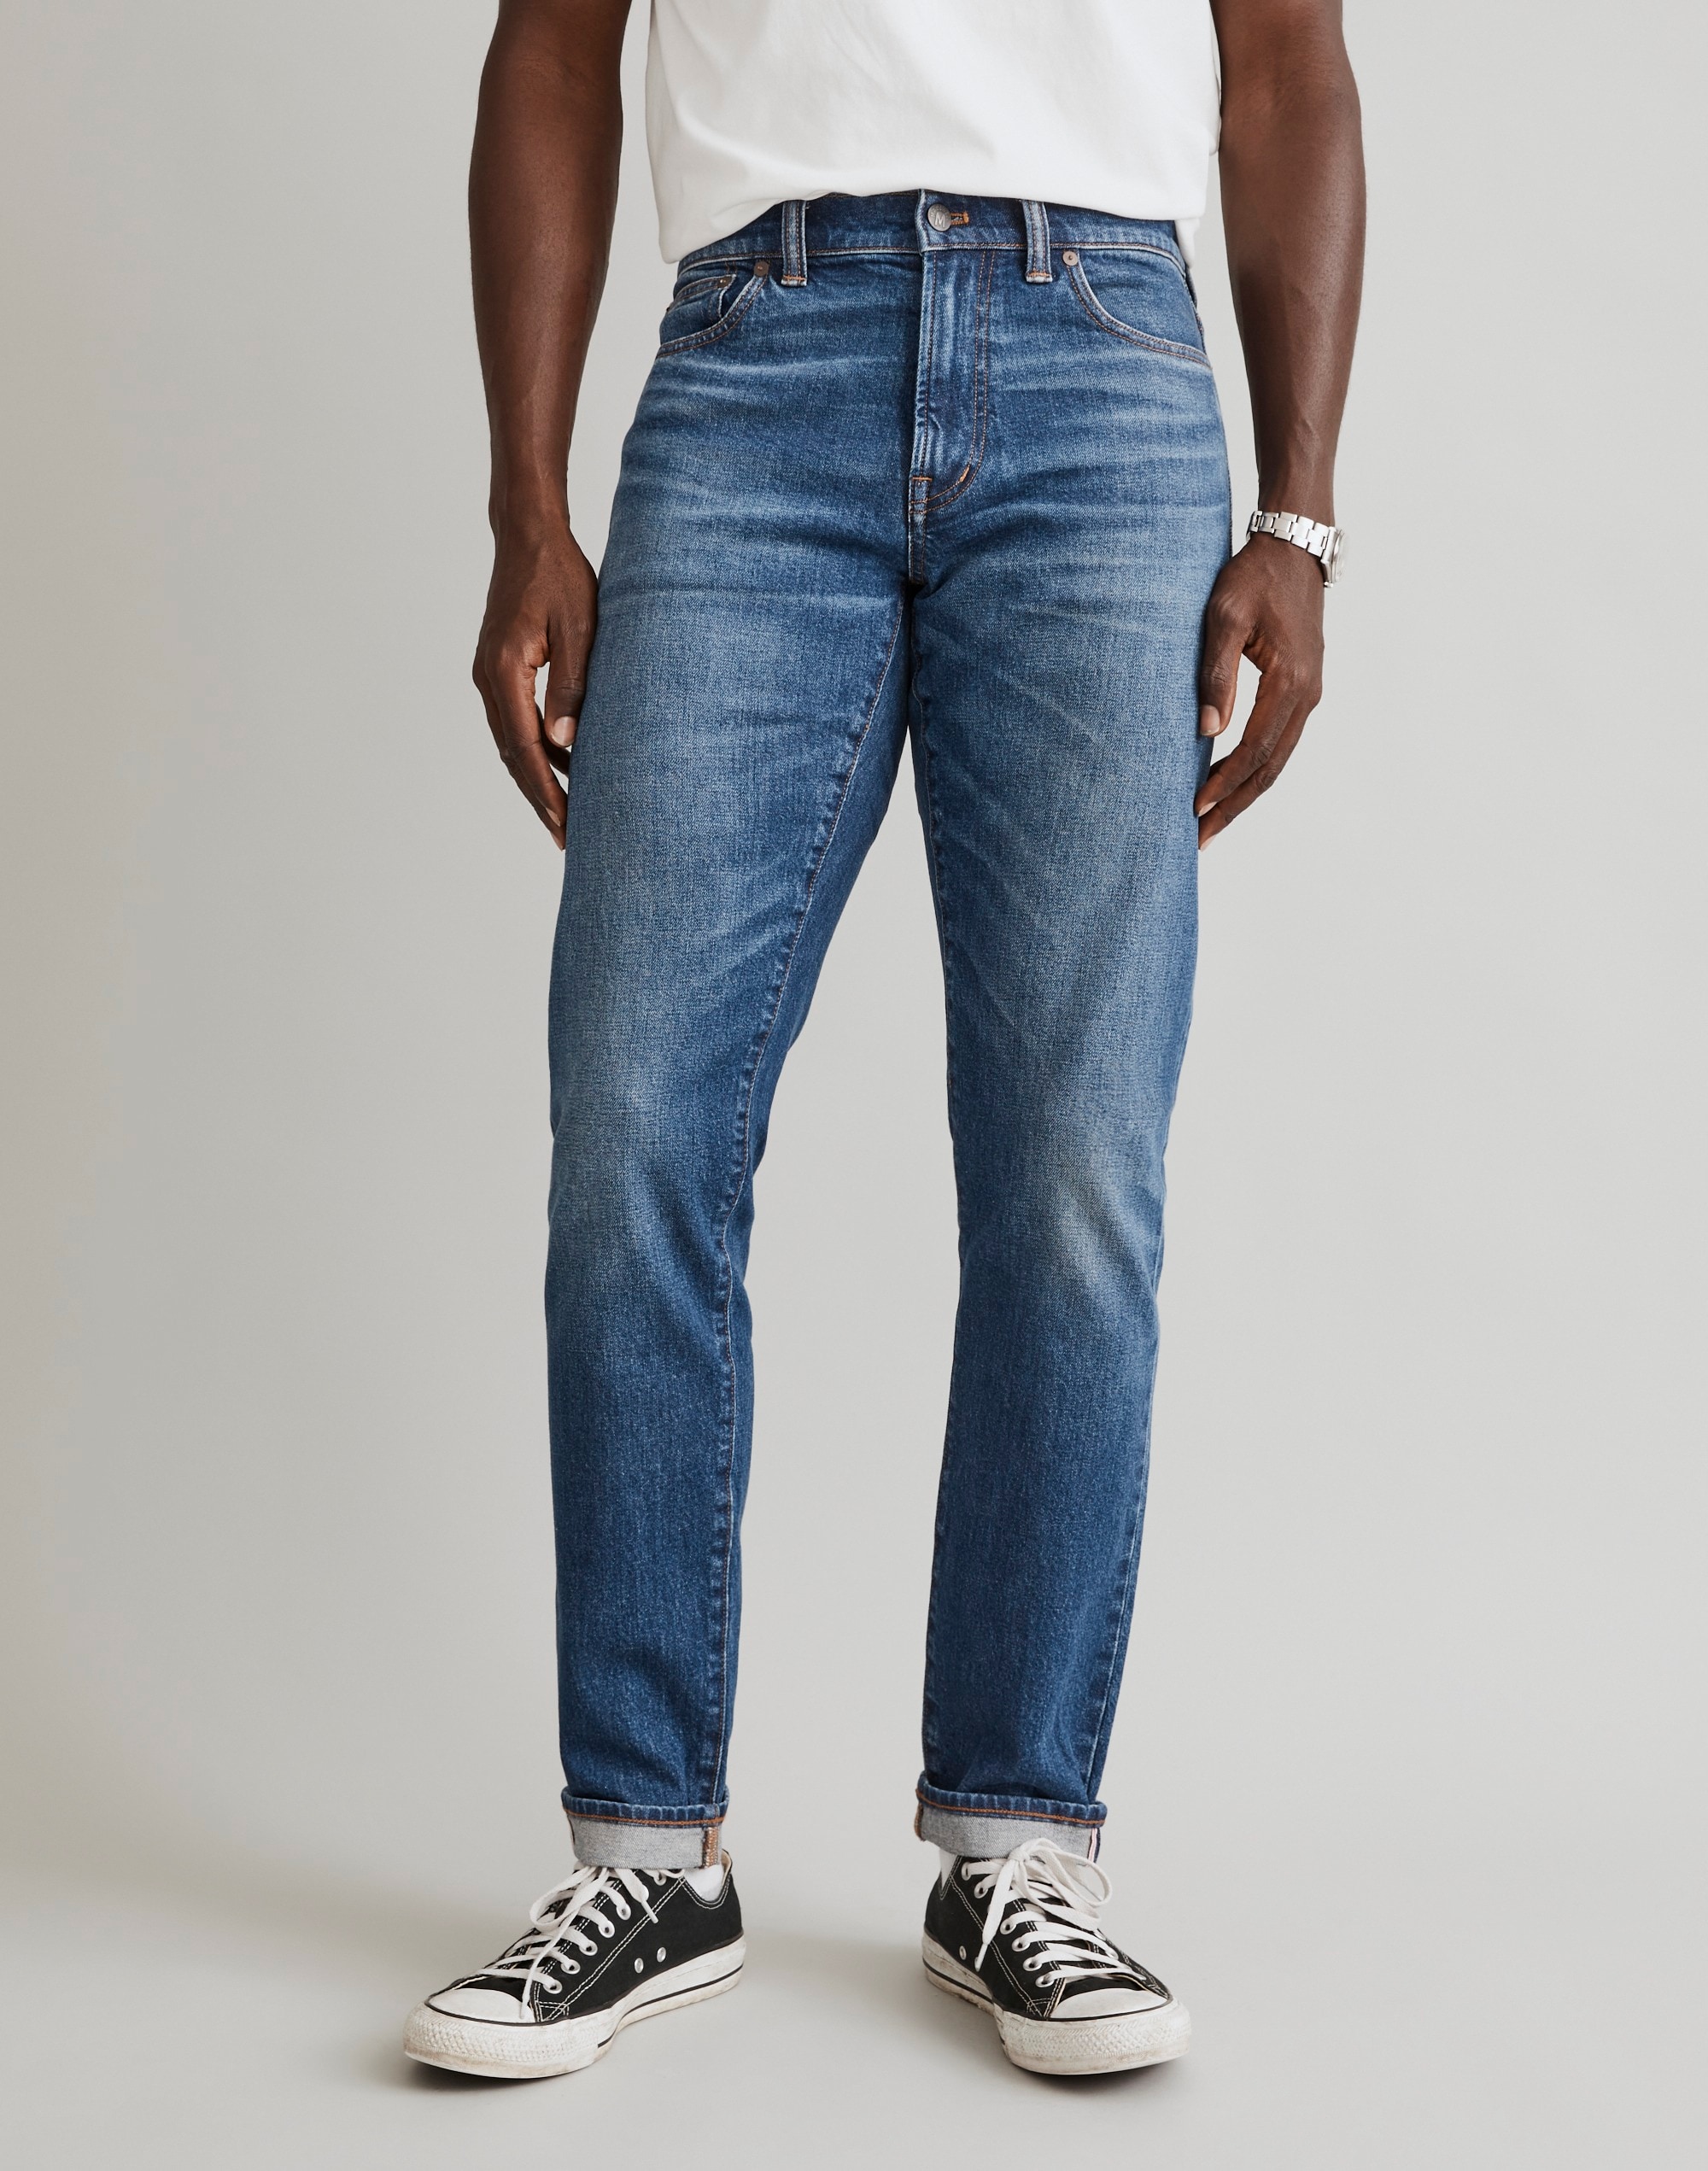 Athletic Slim Selvedge Jeans Penwood Wash: Breast Cancer Research Edition